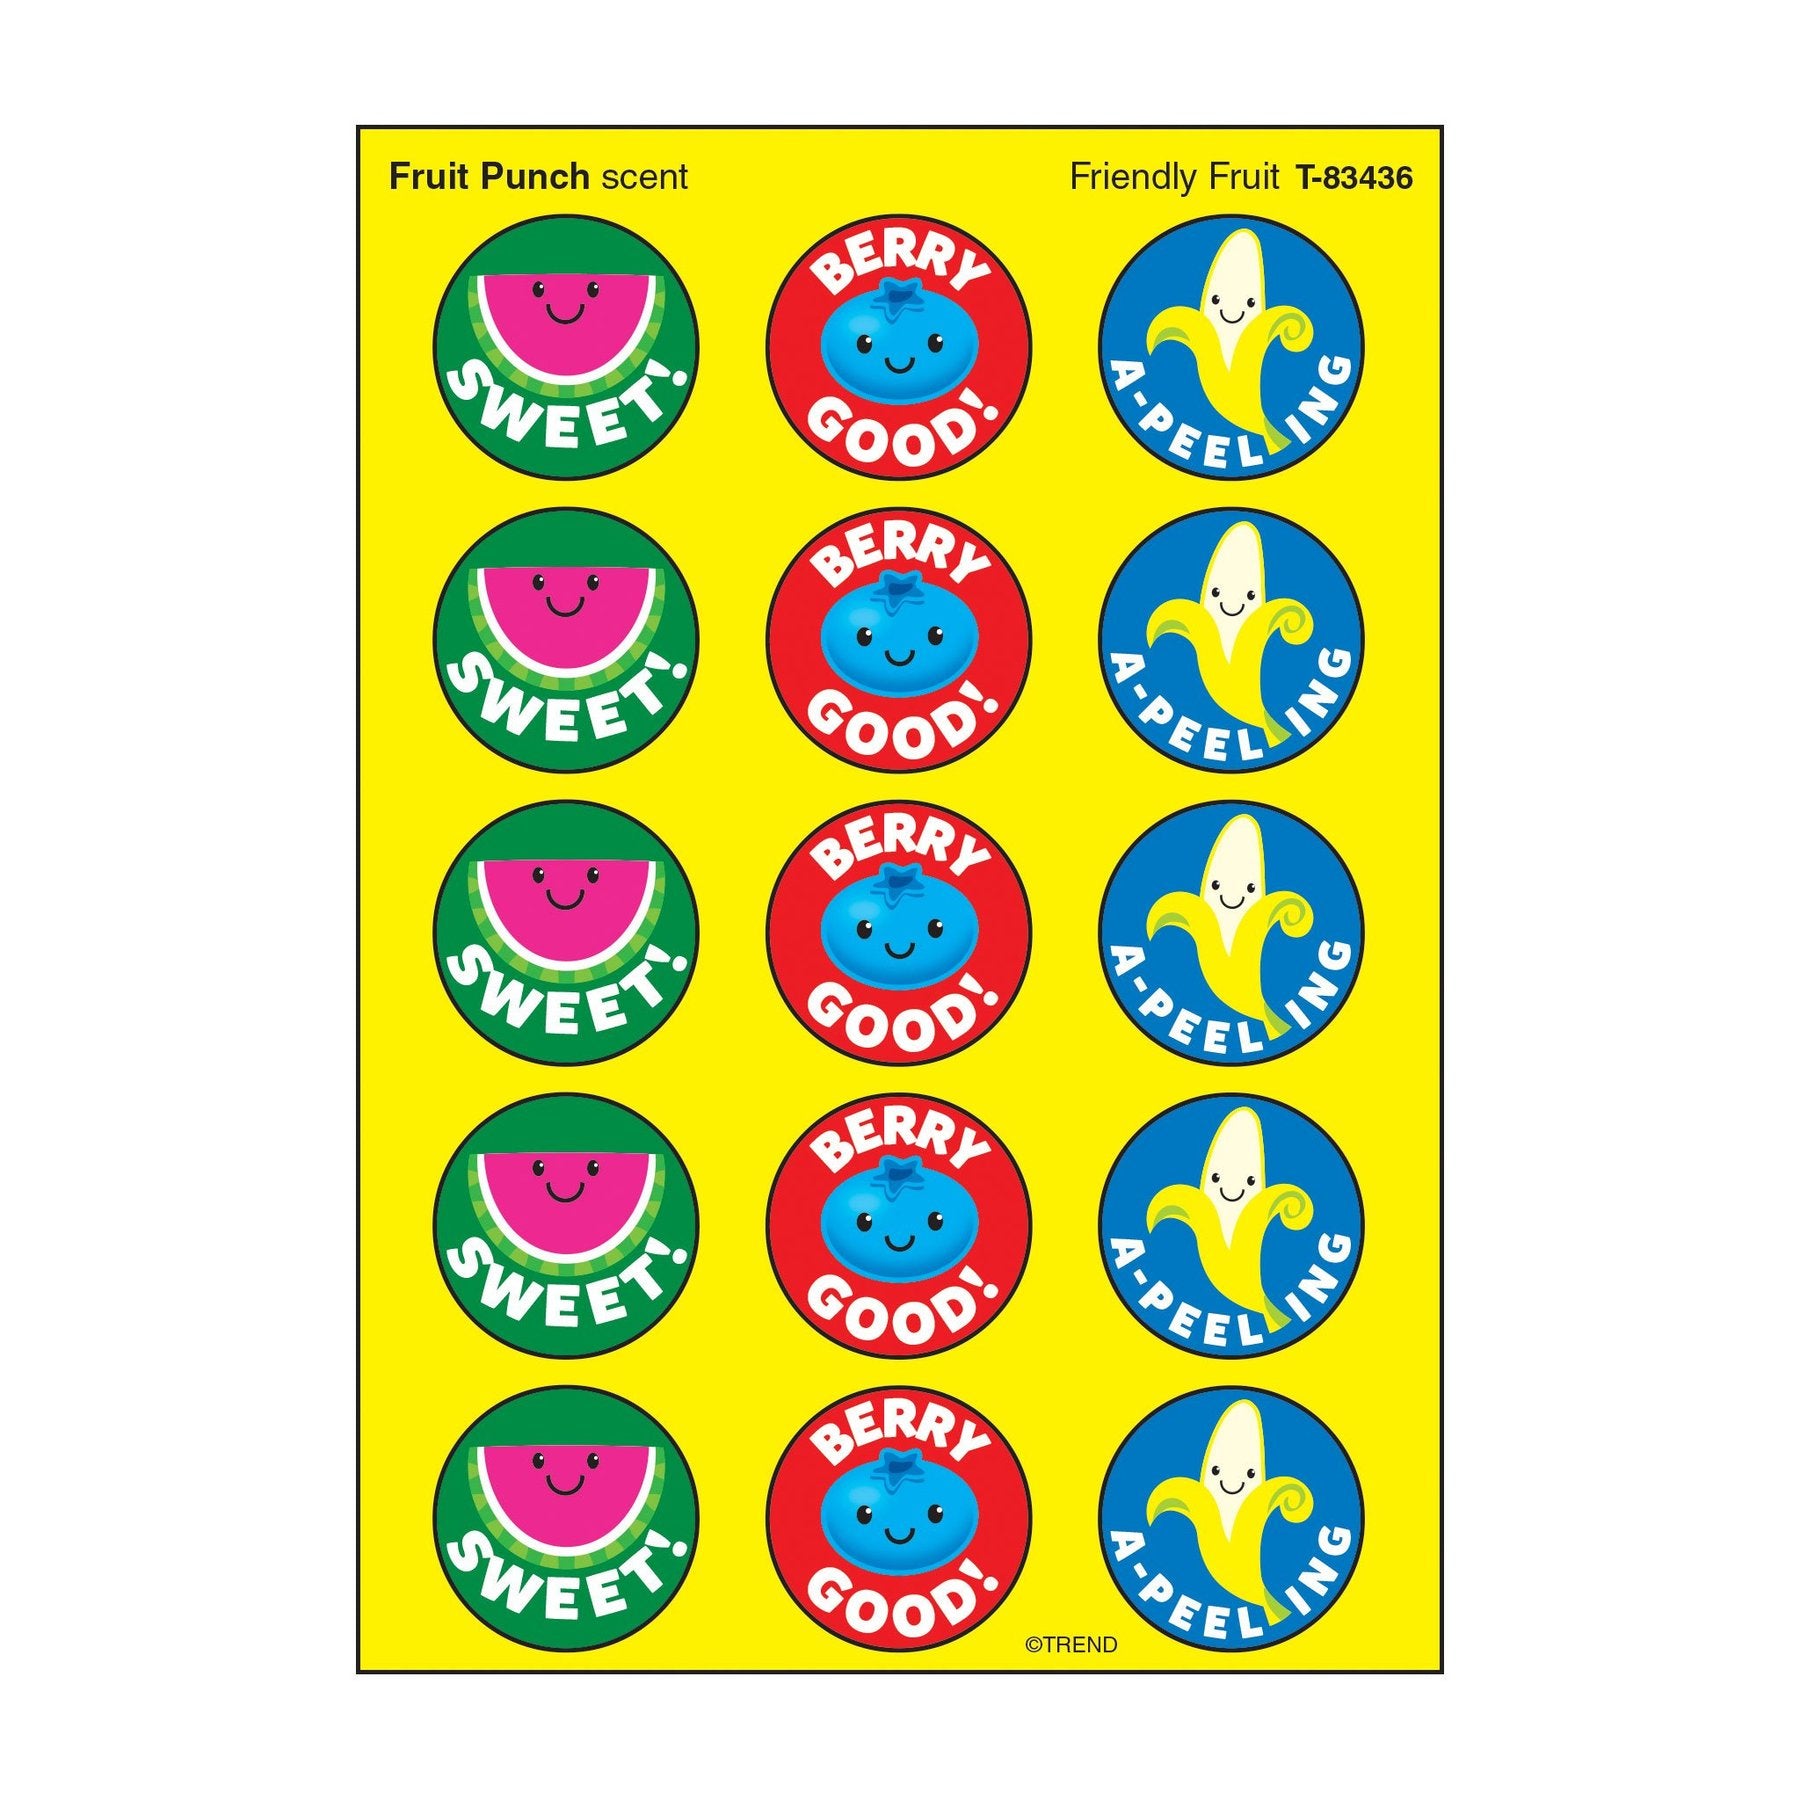 Friendly Fruit, Fruit Punch scent Scratch 'n Sniff Stinky Stickers® – Large Round